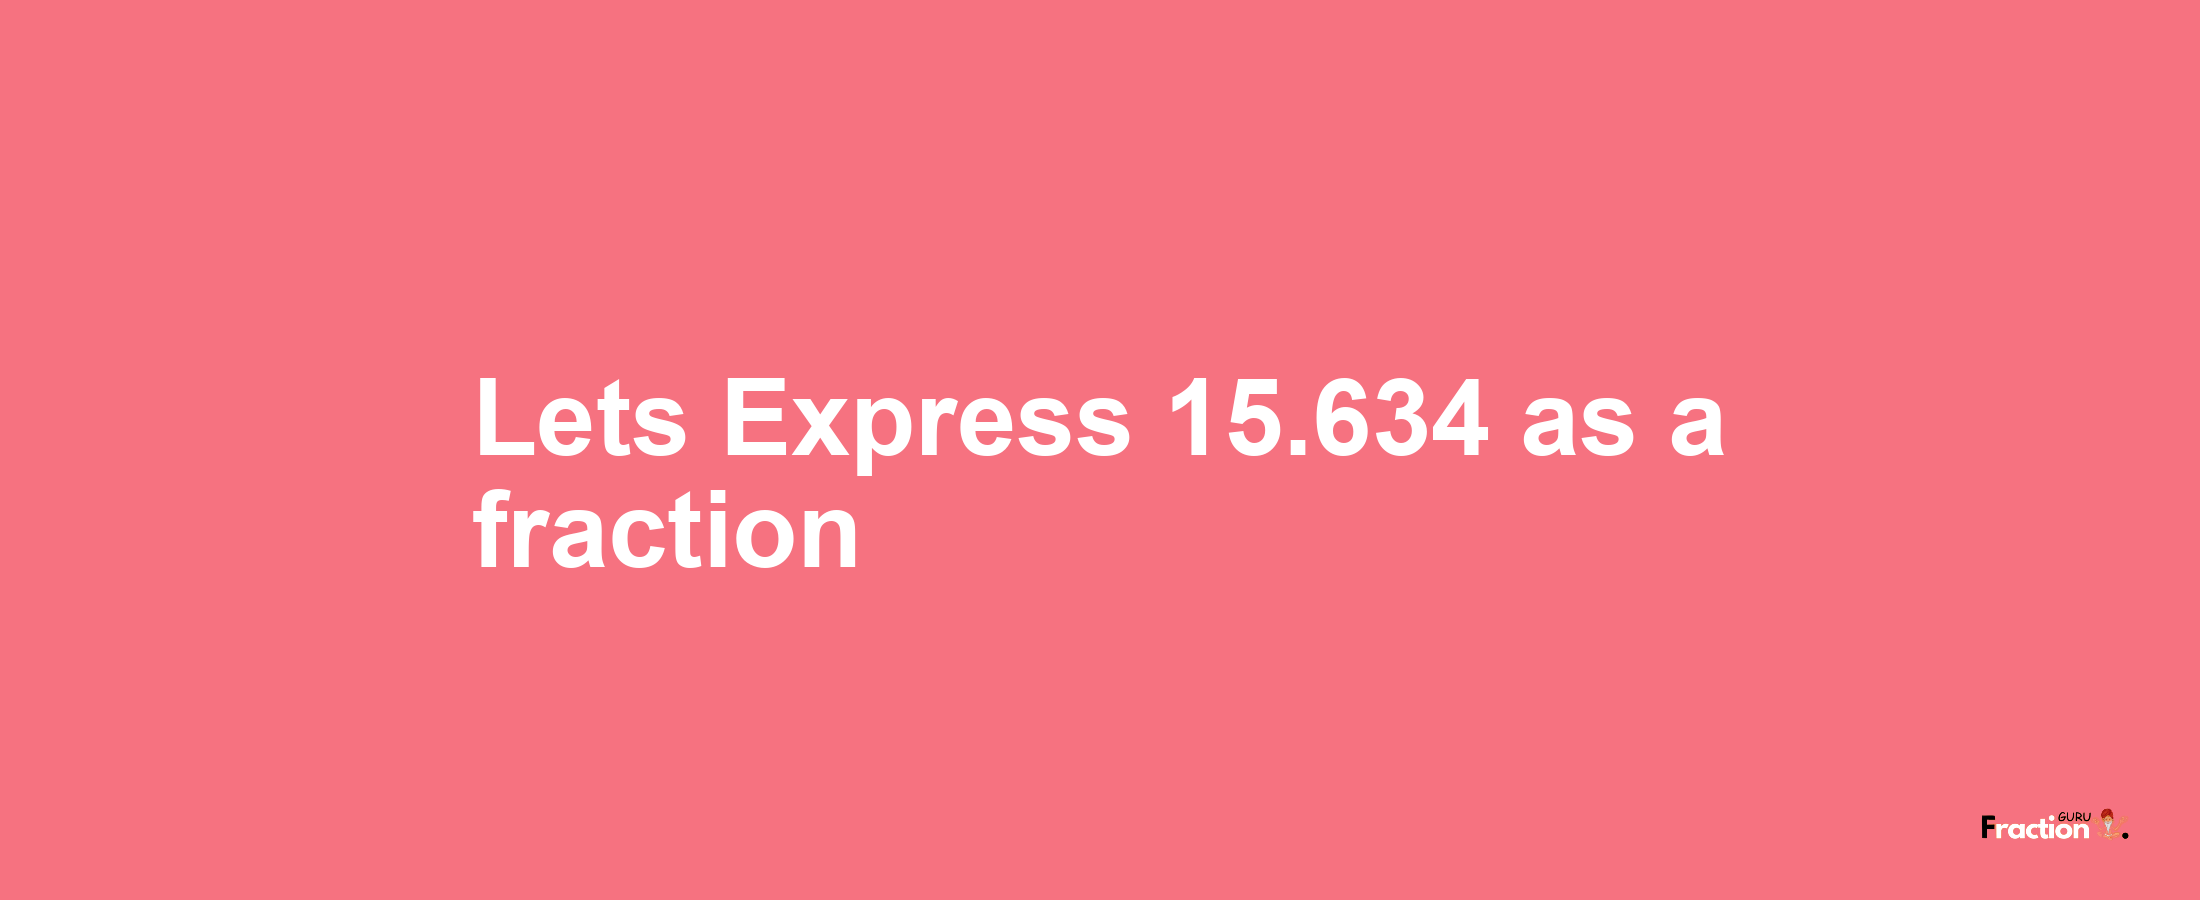 Lets Express 15.634 as afraction